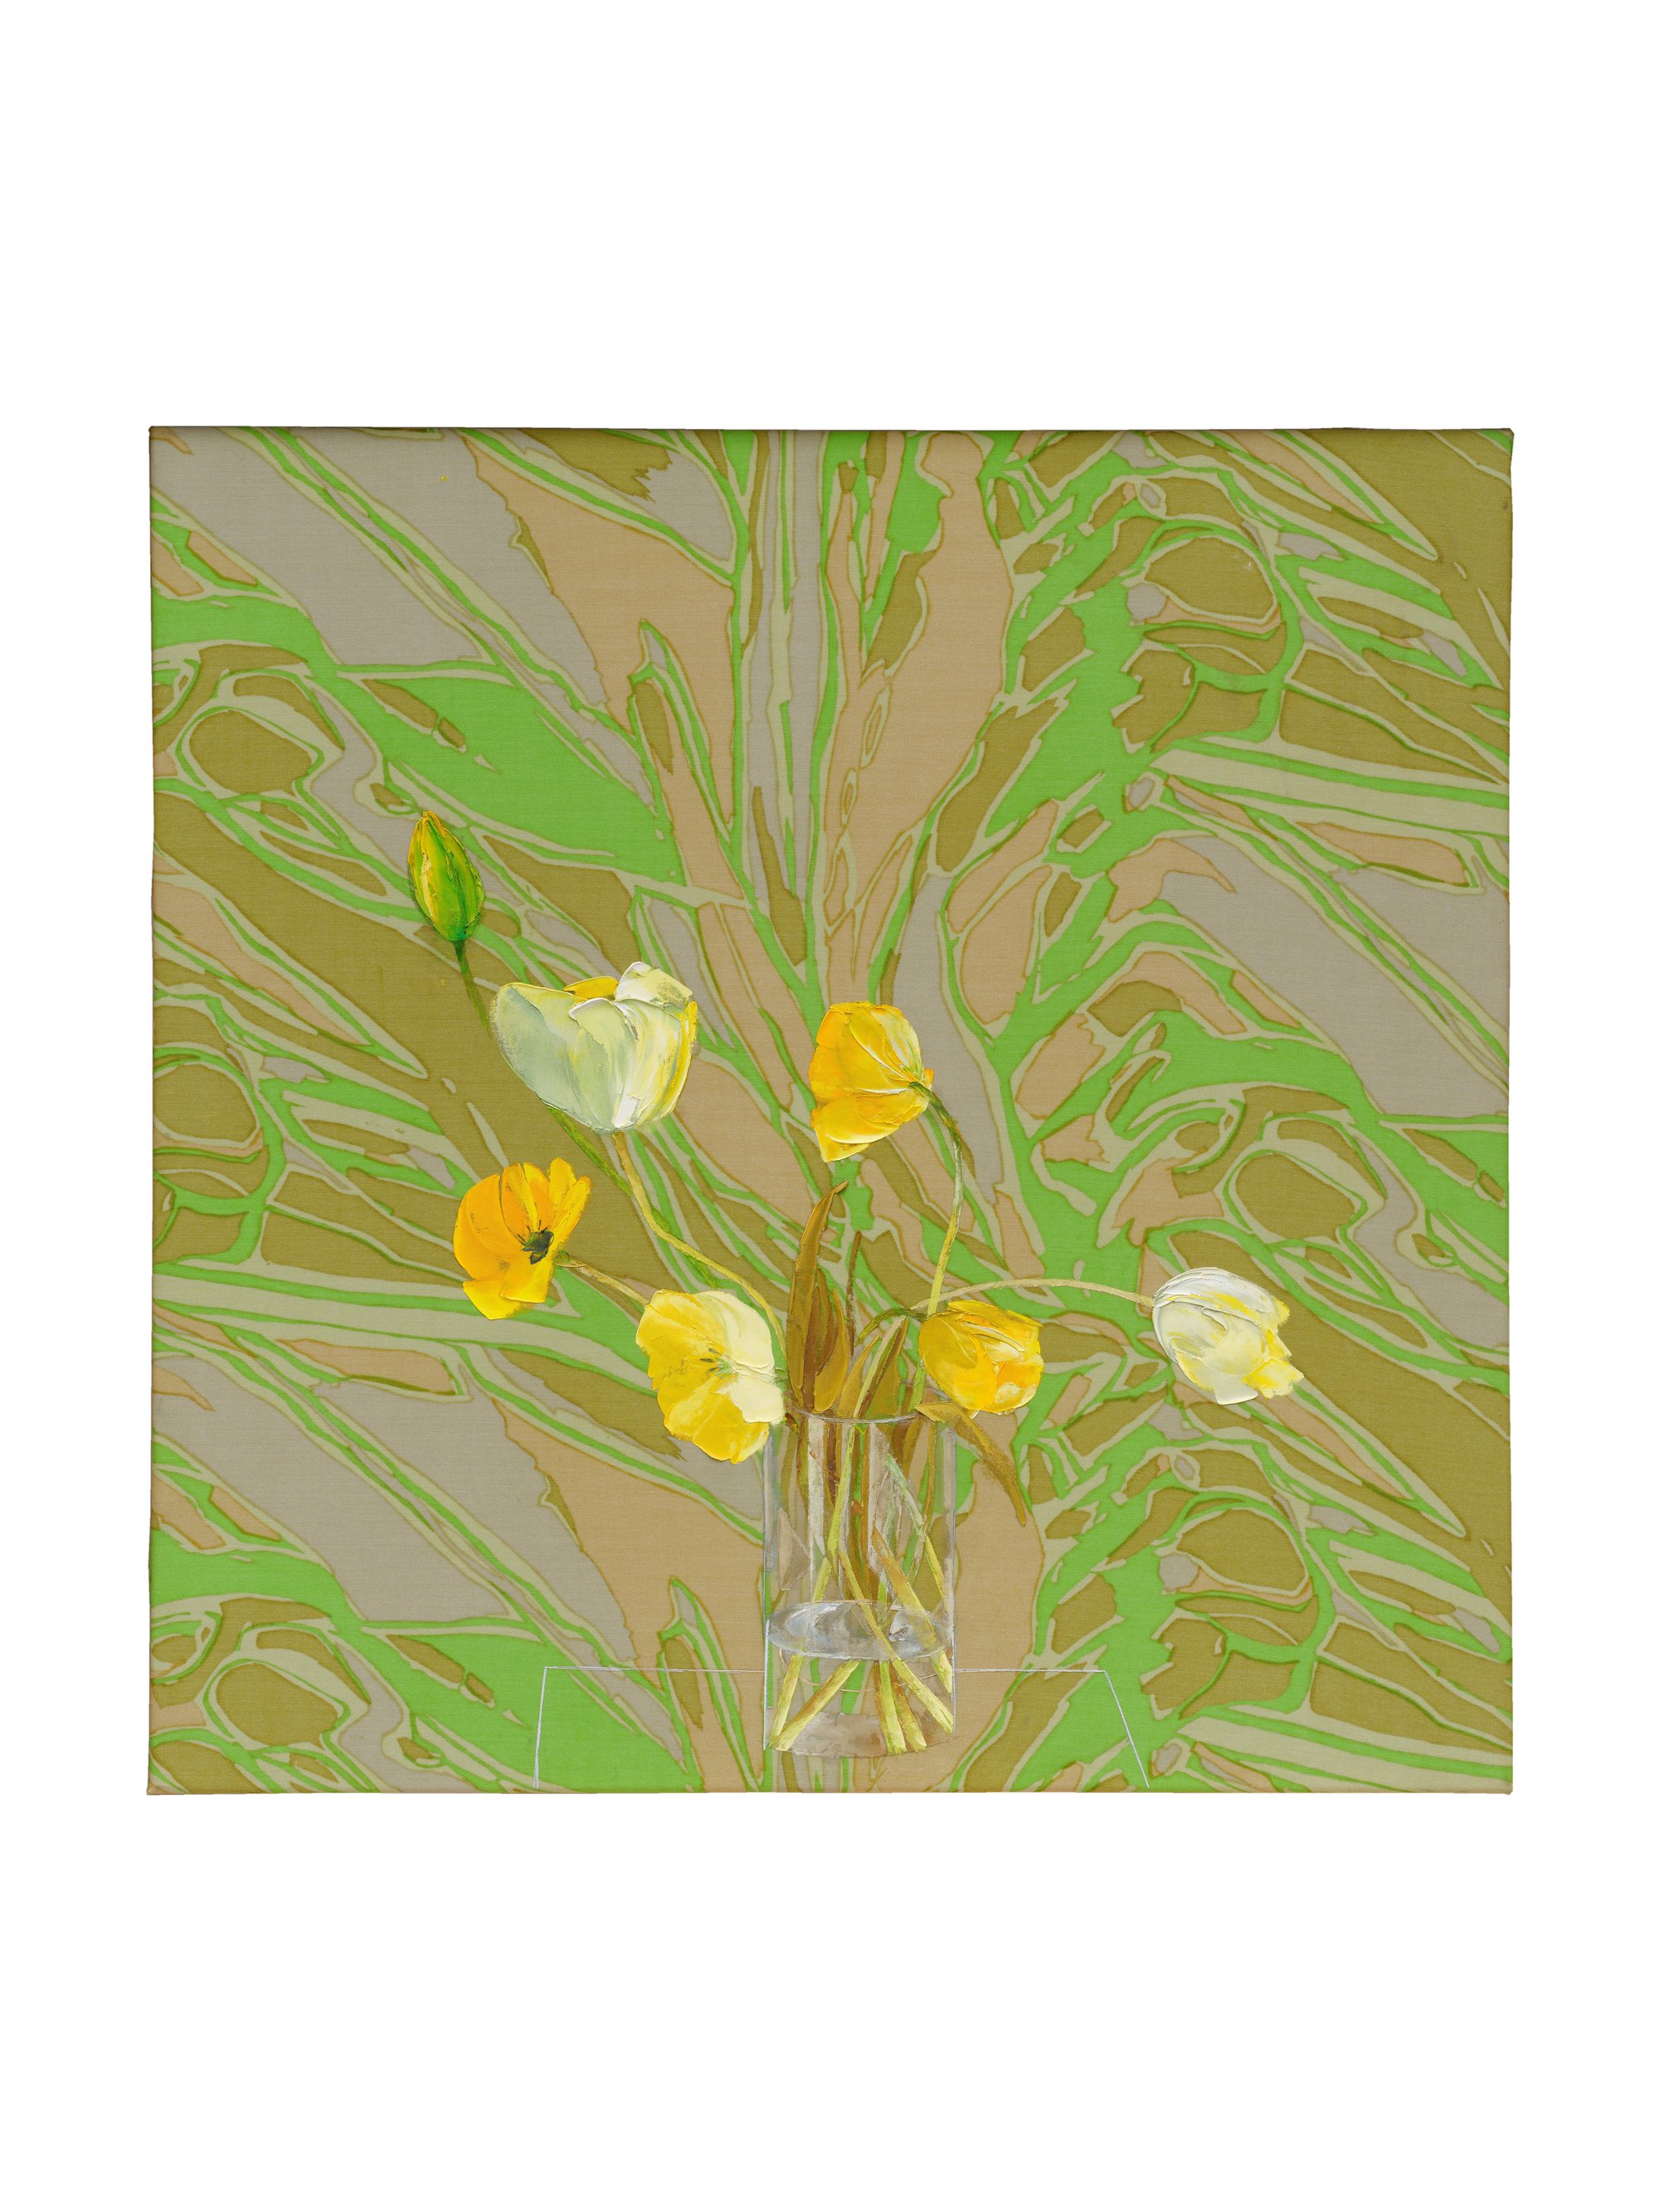 Bernat Klein, Yellow Tulips, oil on screen printed knitted jersey polyester (Diolen), 106 x 106 cm, 1998